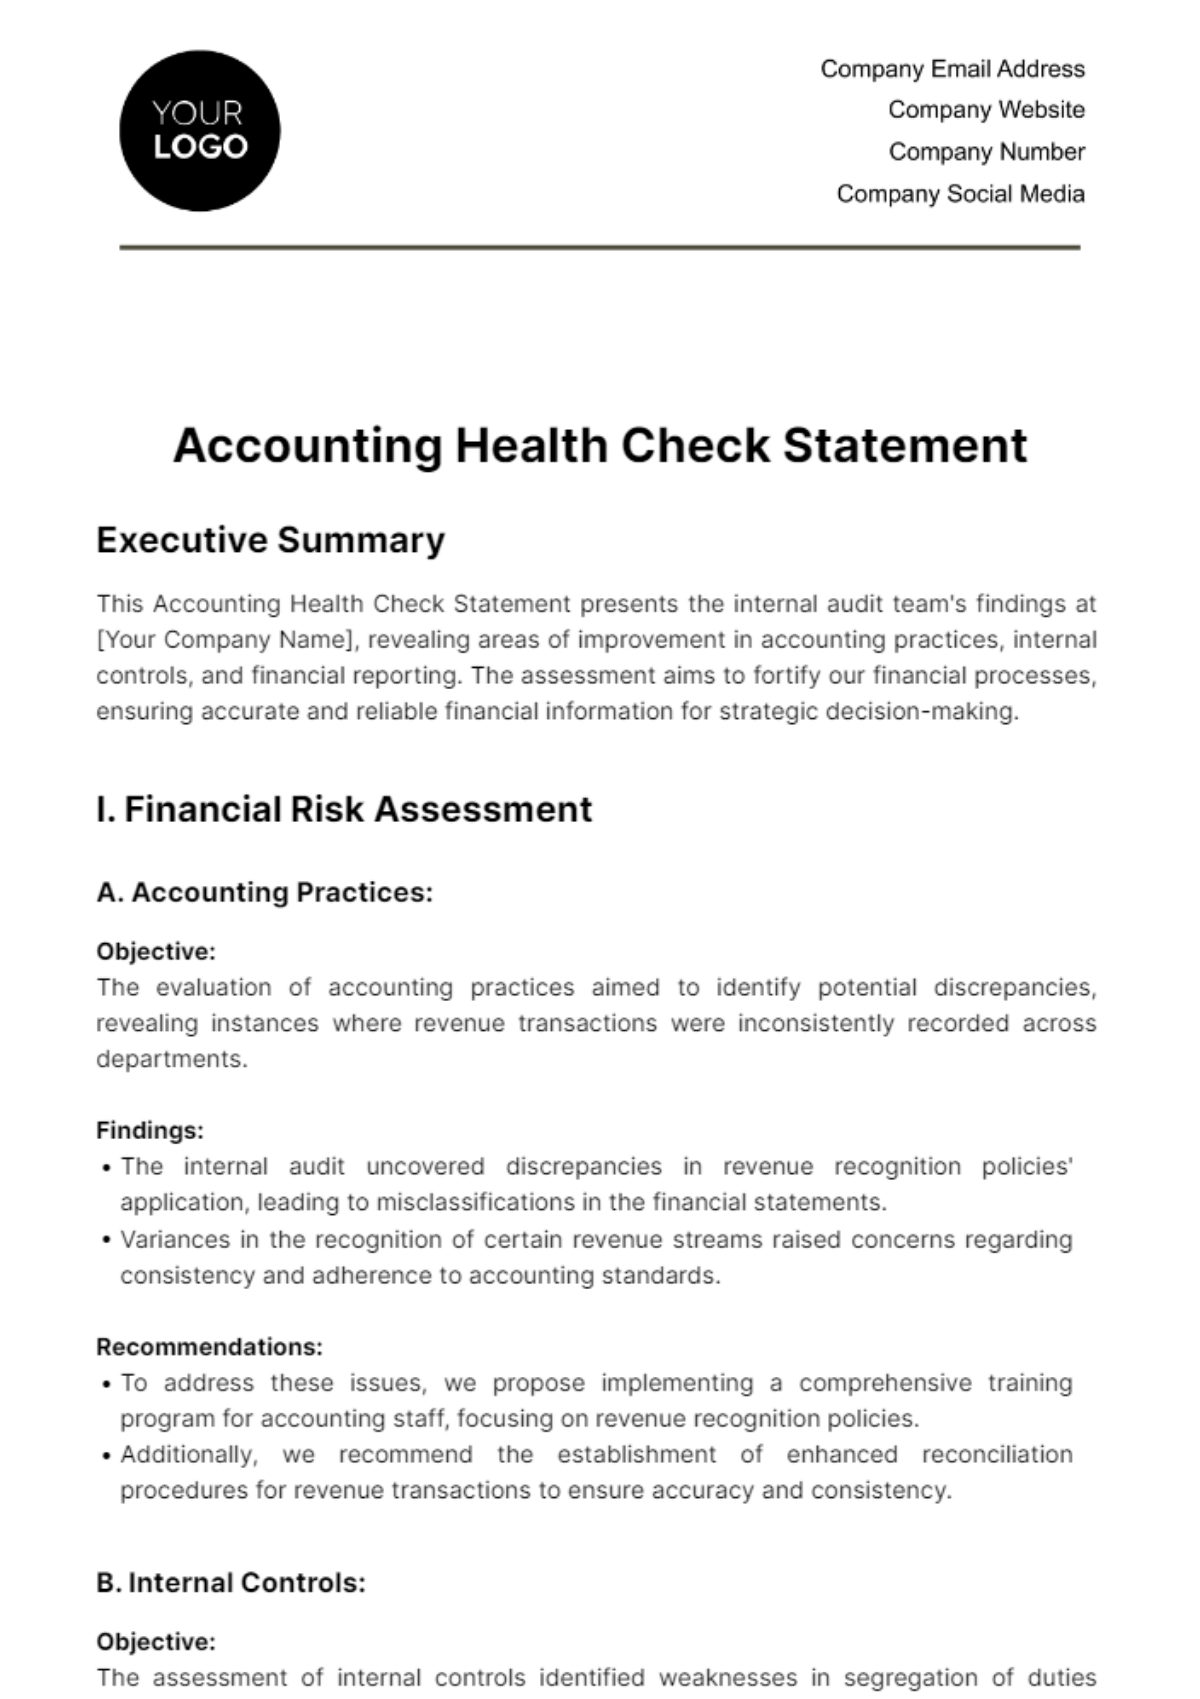 Accounting Health Check Statement Template